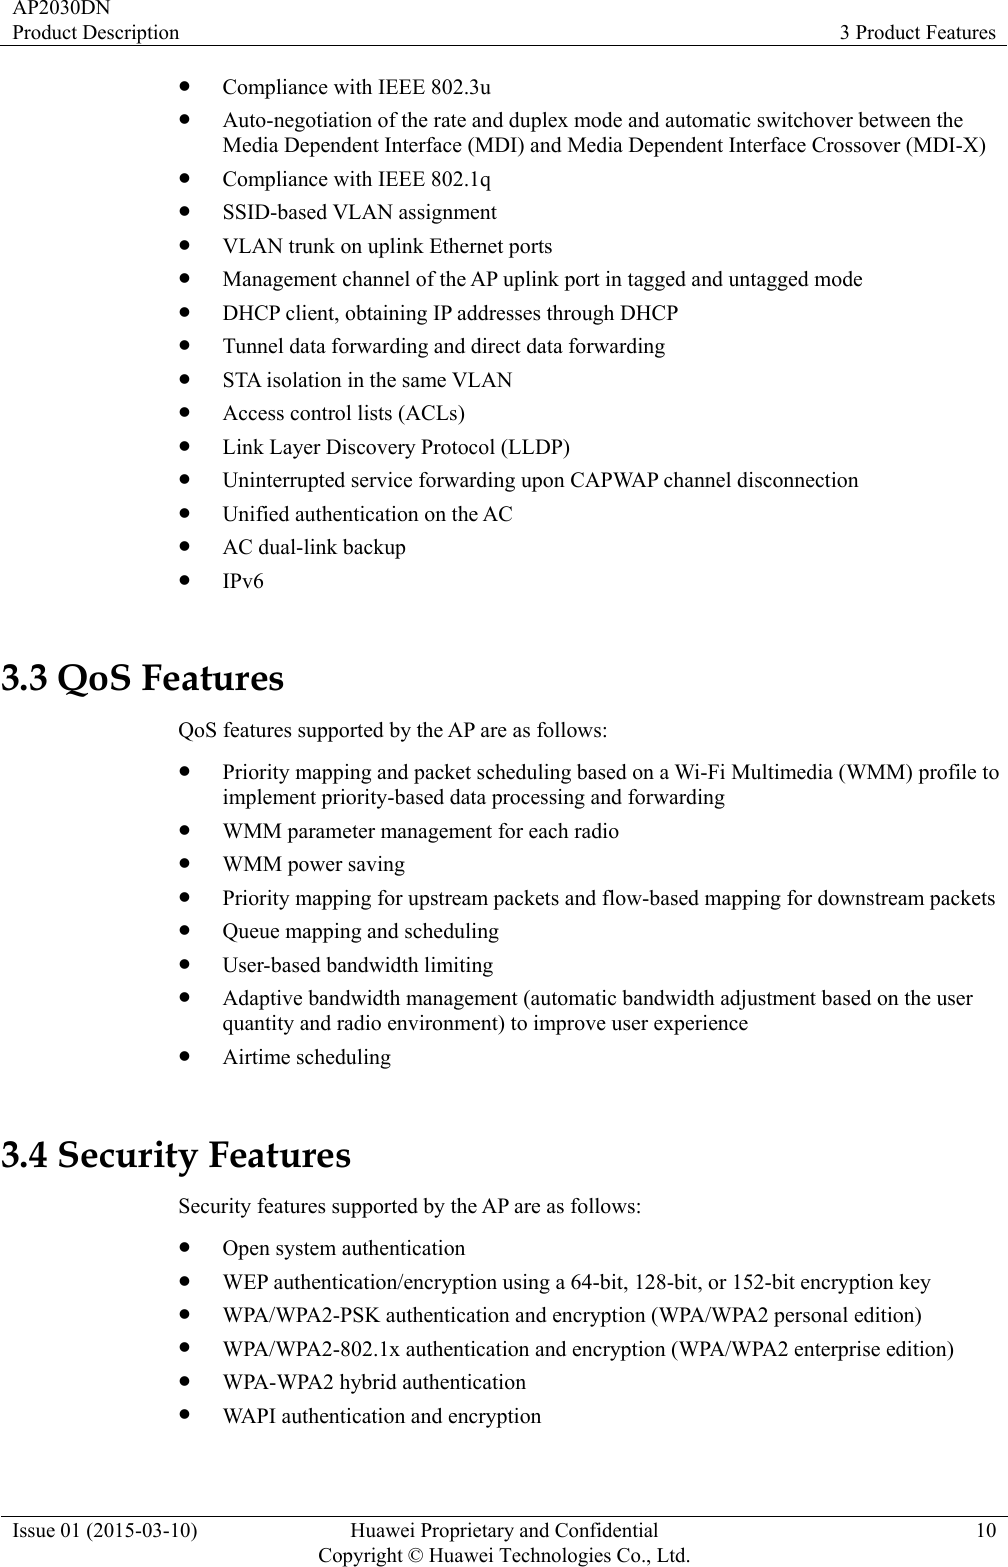 AP2030DN Product Description  3 Product Features Issue 01 (2015-03-10)  Huawei Proprietary and Confidential         Copyright © Huawei Technologies Co., Ltd.10 z Compliance with IEEE 802.3u z Auto-negotiation of the rate and duplex mode and automatic switchover between the Media Dependent Interface (MDI) and Media Dependent Interface Crossover (MDI-X) z Compliance with IEEE 802.1q z SSID-based VLAN assignment z VLAN trunk on uplink Ethernet ports z Management channel of the AP uplink port in tagged and untagged mode z DHCP client, obtaining IP addresses through DHCP z Tunnel data forwarding and direct data forwarding z STA isolation in the same VLAN z Access control lists (ACLs) z Link Layer Discovery Protocol (LLDP) z Uninterrupted service forwarding upon CAPWAP channel disconnection z Unified authentication on the AC z AC dual-link backup z IPv6 3.3 QoS Features QoS features supported by the AP are as follows: z Priority mapping and packet scheduling based on a Wi-Fi Multimedia (WMM) profile to implement priority-based data processing and forwarding z WMM parameter management for each radio z WMM power saving z Priority mapping for upstream packets and flow-based mapping for downstream packets z Queue mapping and scheduling z User-based bandwidth limiting z Adaptive bandwidth management (automatic bandwidth adjustment based on the user quantity and radio environment) to improve user experience z Airtime scheduling 3.4 Security Features Security features supported by the AP are as follows: z Open system authentication z WEP authentication/encryption using a 64-bit, 128-bit, or 152-bit encryption key z WPA/WPA2-PSK authentication and encryption (WPA/WPA2 personal edition) z WPA/WPA2-802.1x authentication and encryption (WPA/WPA2 enterprise edition)   z WPA-WPA2 hybrid authentication z WAPI authentication and encryption 